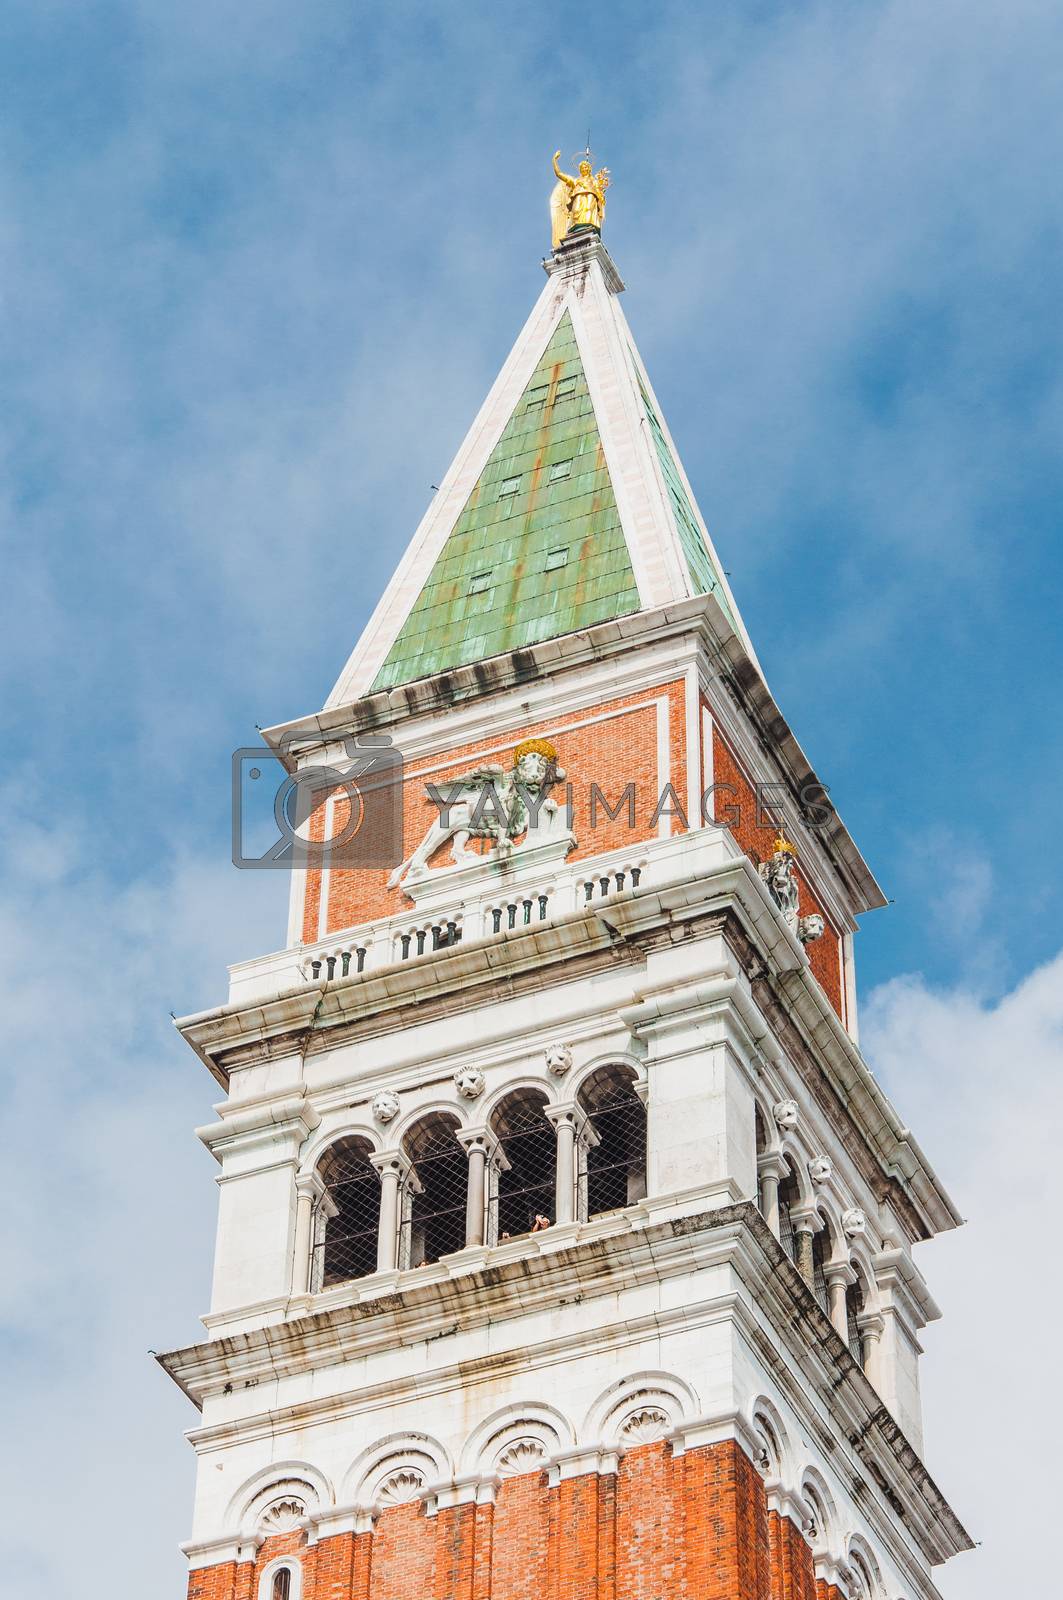 Royalty free image of The campanile of St. Mark's Square in Venice by raphtong